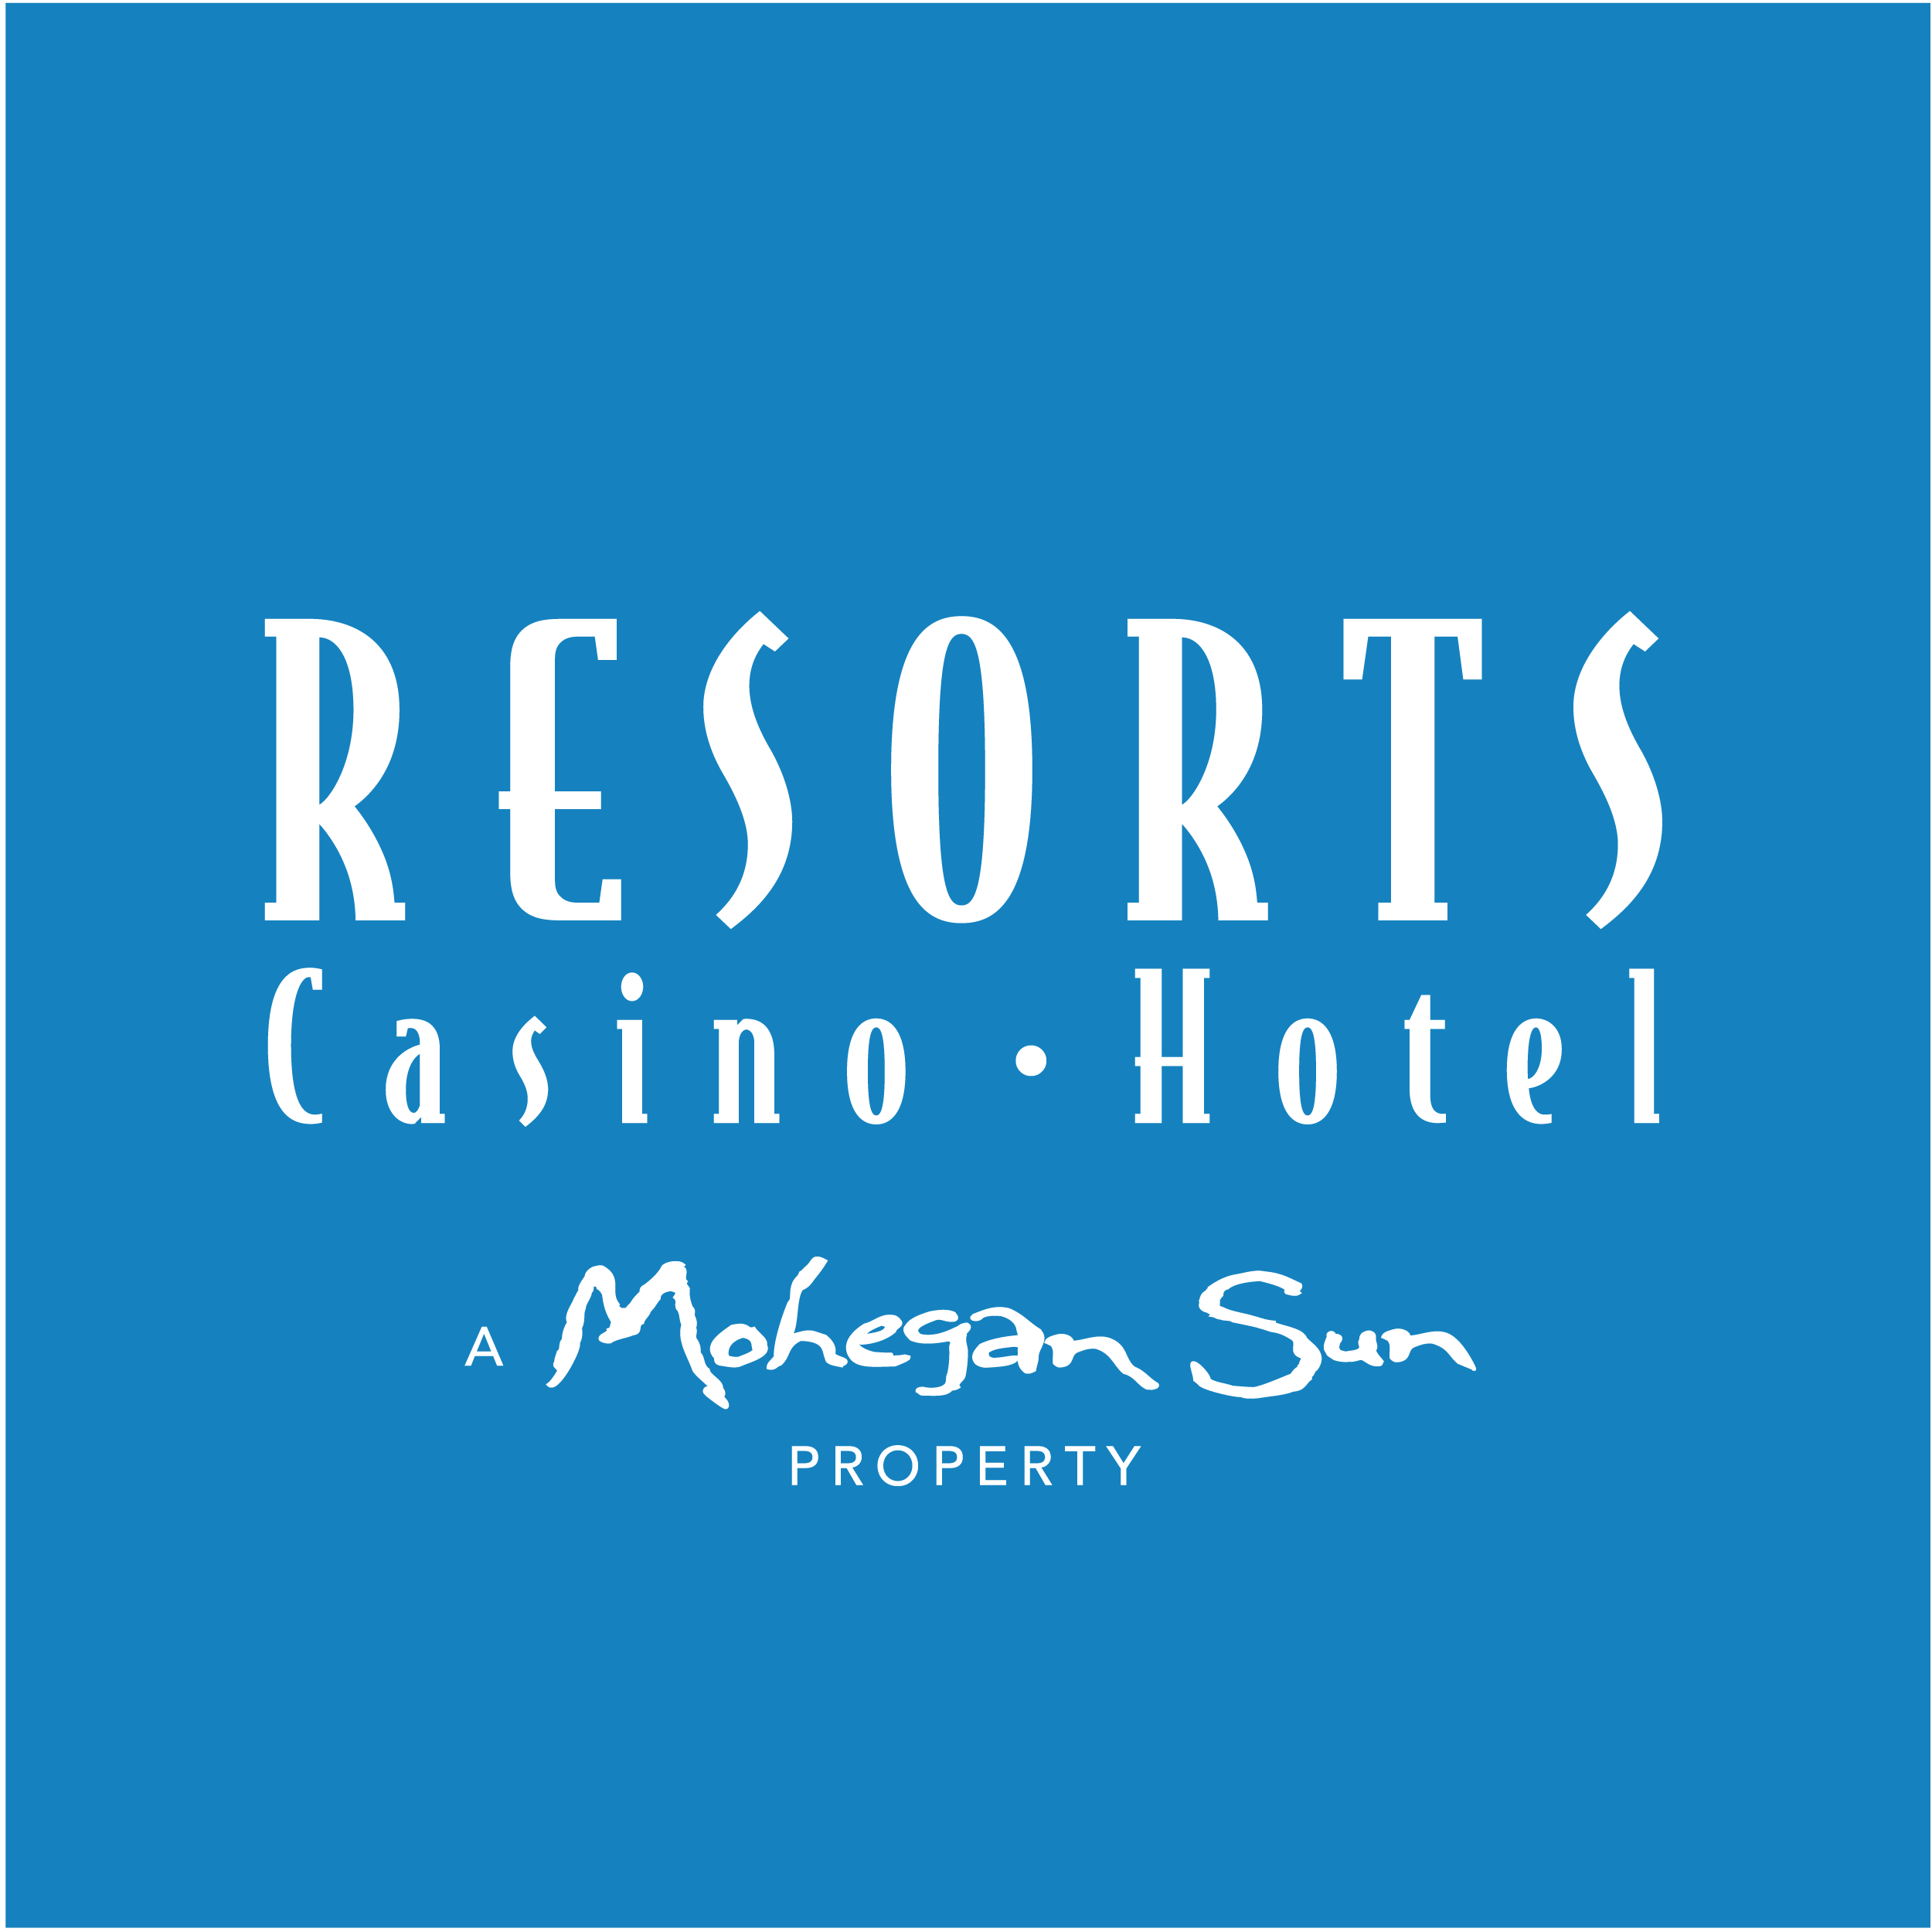 RESORTS-BLUE-LOGO Now You Can Have Your bk Parimatch Done Safely